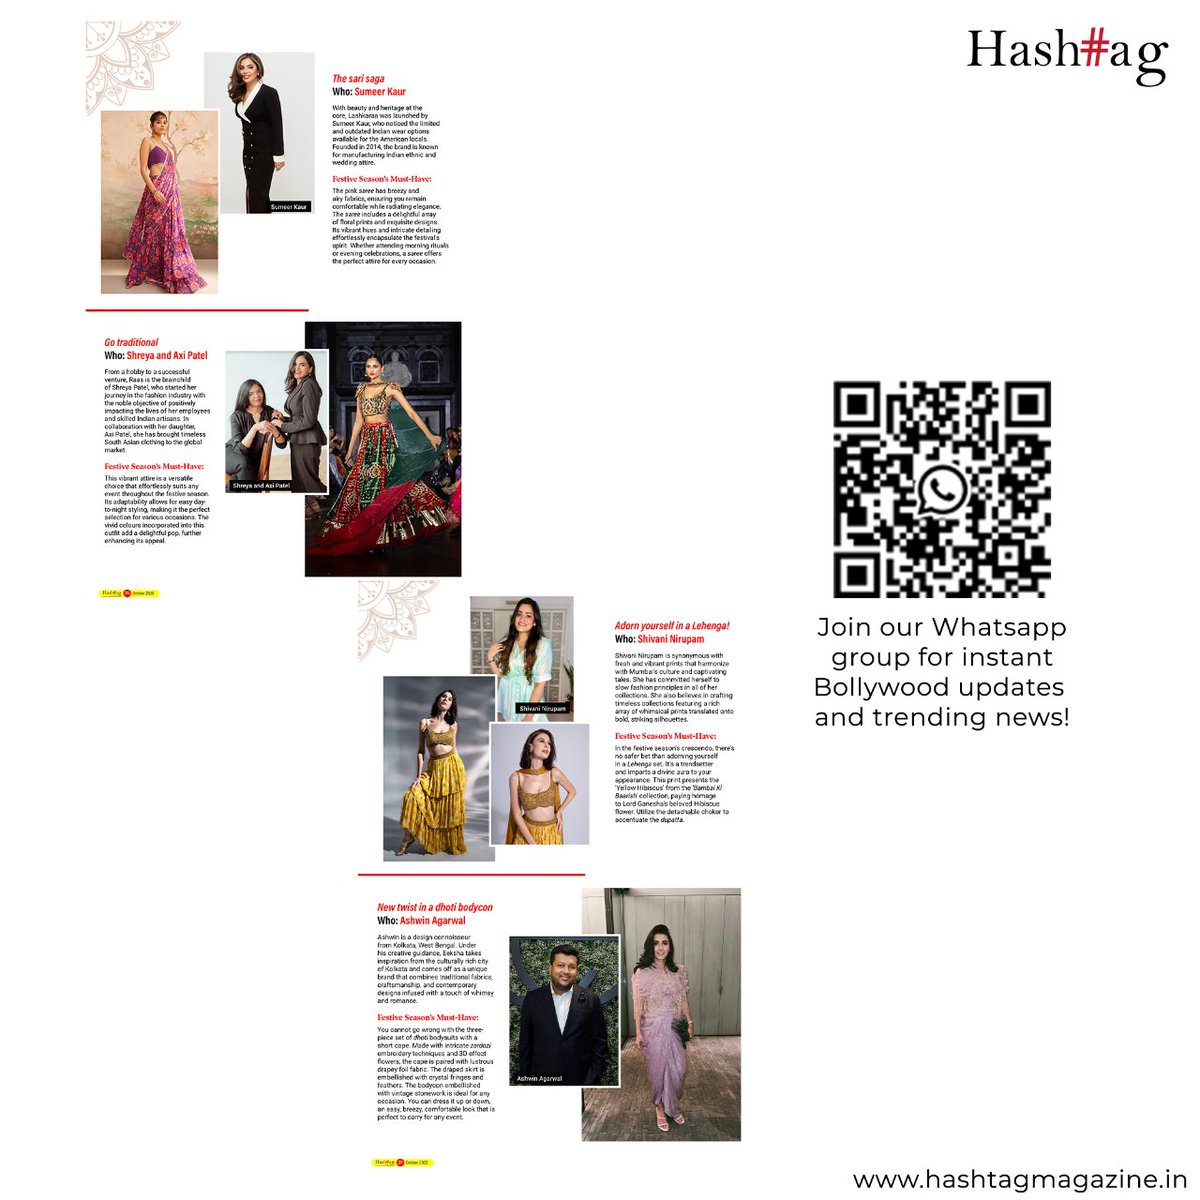 Wedding season has started, and brides, get ready to be excited! Explore our latest magazine for an exclusive Bridal Fashion Guide that's set to ignite your wedding dreams. Visit the Link hashtagmagazine.in/festive-fashio… #BridalFashion #WeddingSeason #StyleInspiration #YourMagazineName